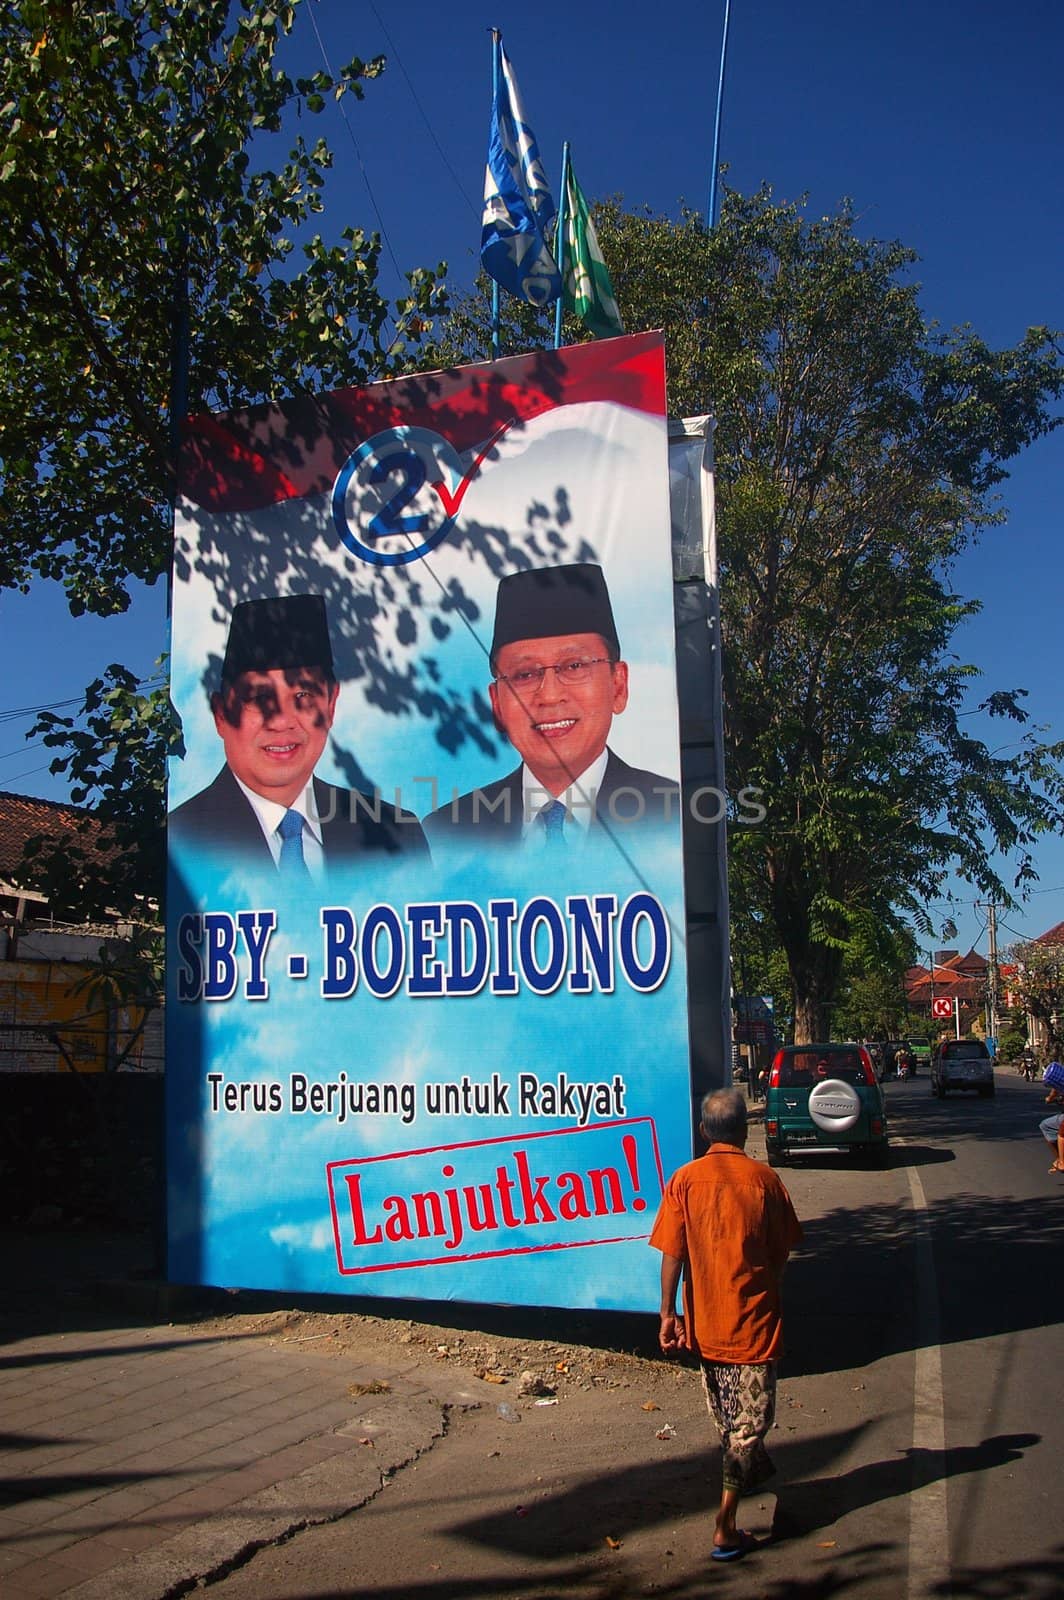 A large billboard of the incumbent President of Indonesia and his running mate, on election day. Denpasar, Bali, Indonesia. July 8, 2009.